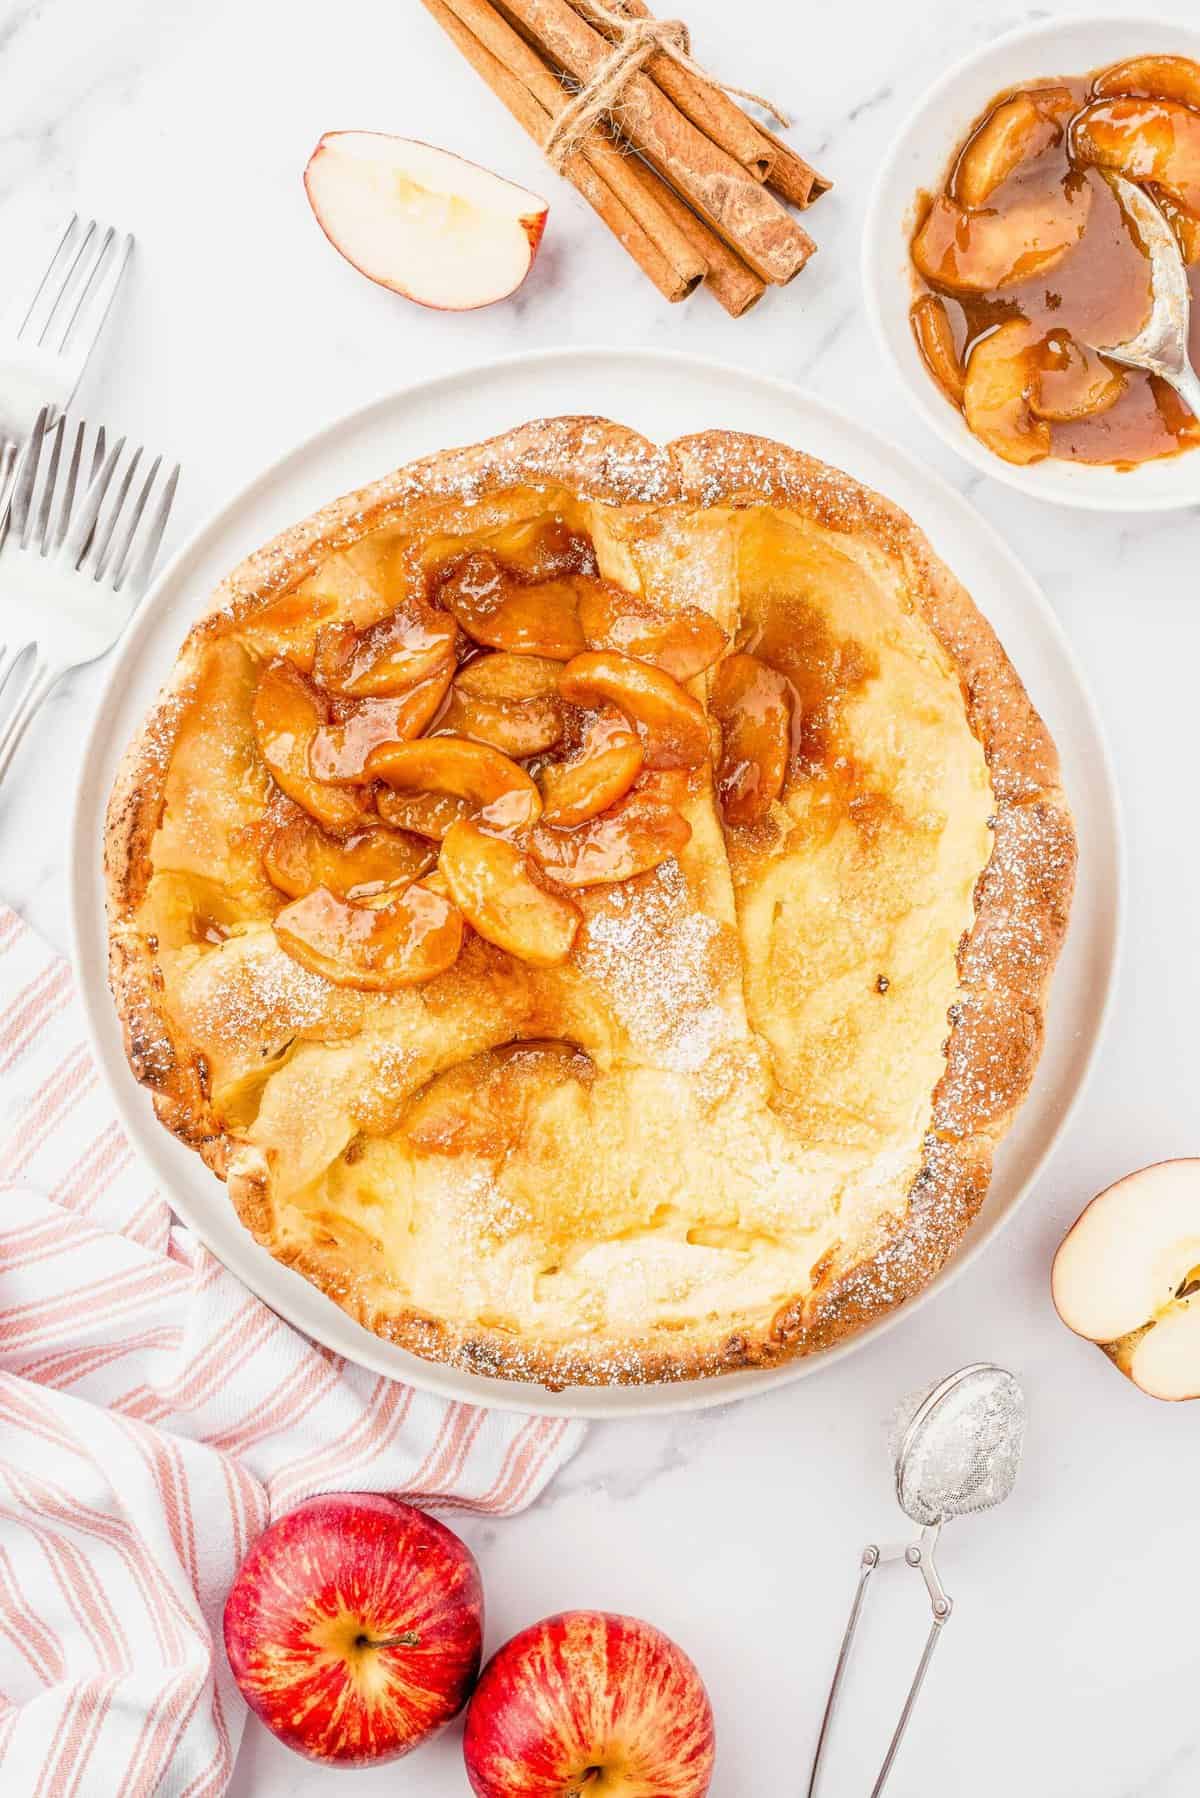 Fall table is set with an Apple Cinnamon Dutch Baby topped with apple compote in the center of table.